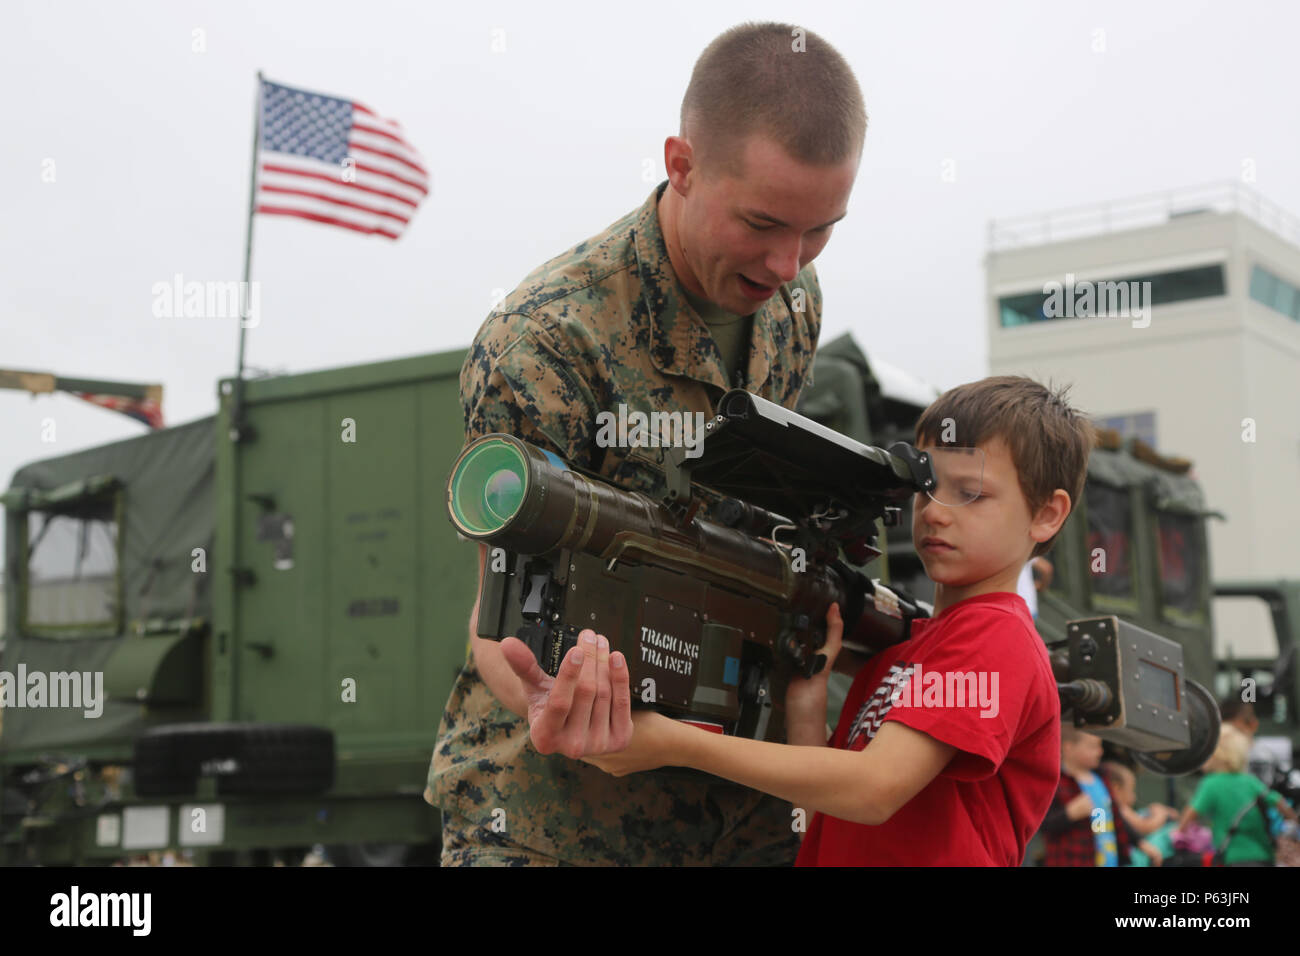 Cpl. Tyler Shiels, a low altitude air defense gunner with 2d Low Altitude Air Defense Battalion  assists Nathan, age 7 as he looks through the sights of a weapon during the 2016 MCAS Cherry Point Air Show – “Celebrating 75 Years” at Marine Corps Air Station Cherry Point, N.C., April 30, 2016. This year’s air show celebrated MCAS Cherry Point and 2nd Marine Aircraft Wing’s 75th anniversary with our biggest line-up of military demonstration teams including the U.S. Navy Blue Angels, the U.S. Air Force F-22 Raptor, the USMC F-35B Lightning II and many more. Stock Photo